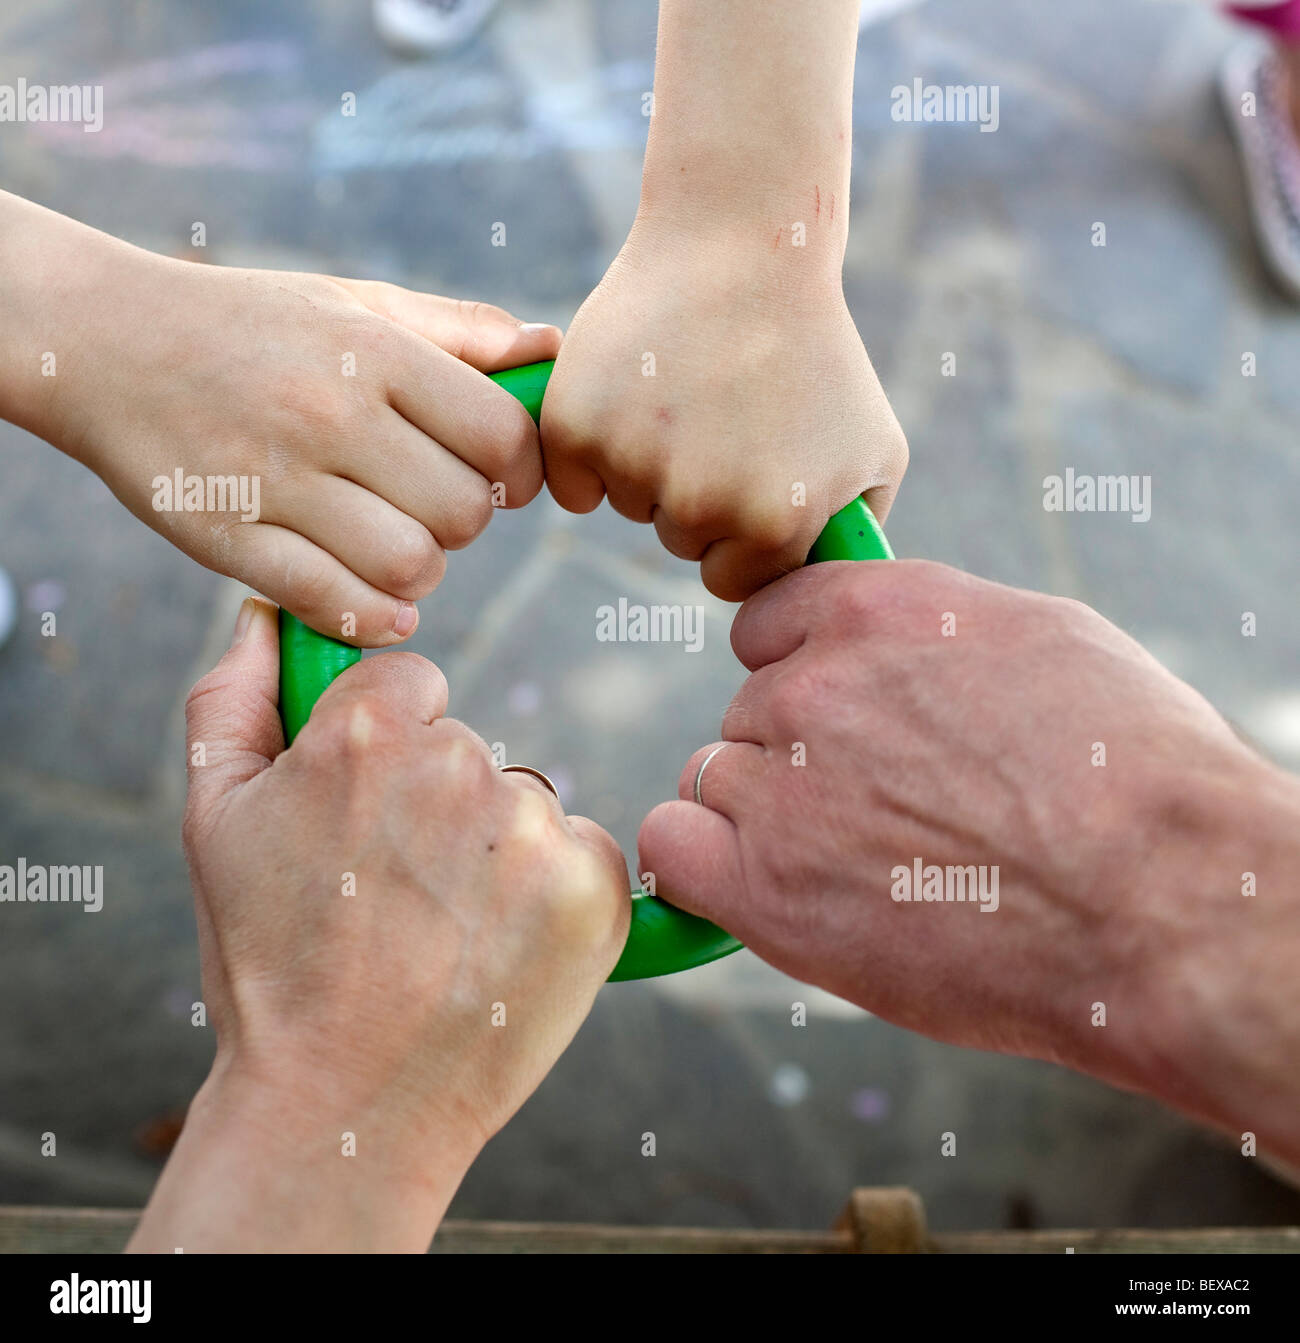 Hands of a family with three children . Stock Photo